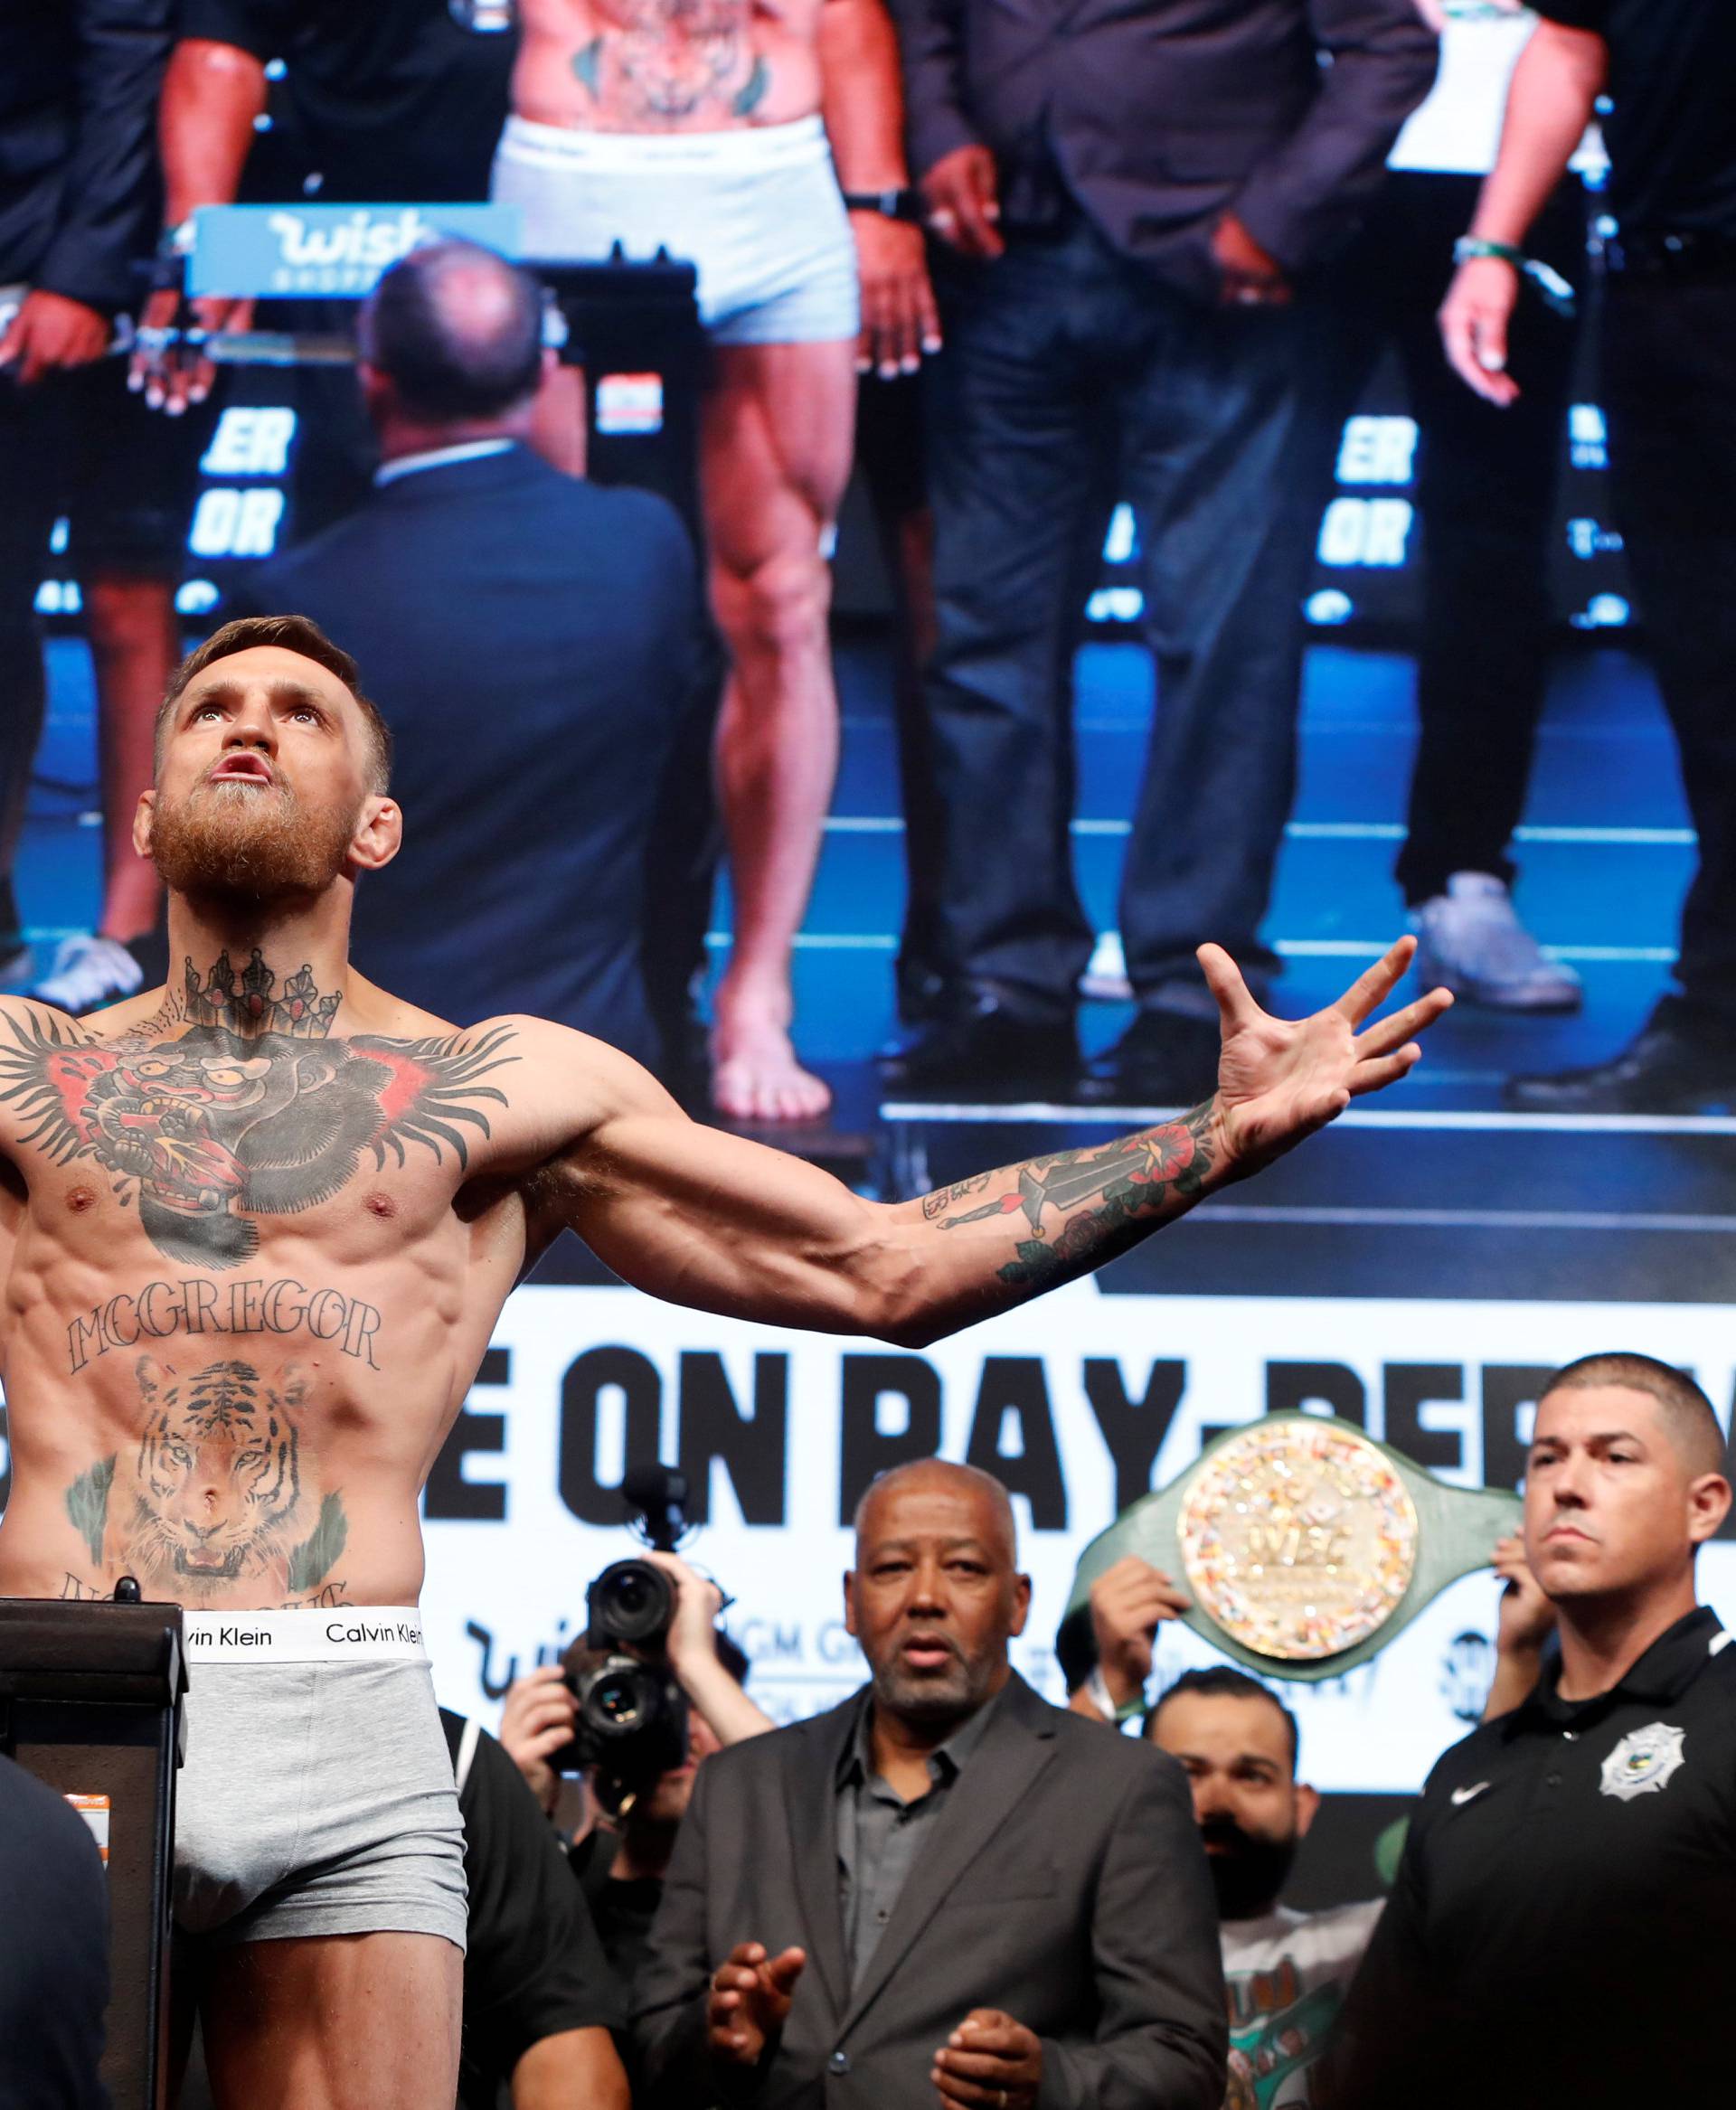 UFC lightweight champion Conor McGregor of Ireland poses on the scale during his official weigh-in at T-Mobile Arena in Las Vegas